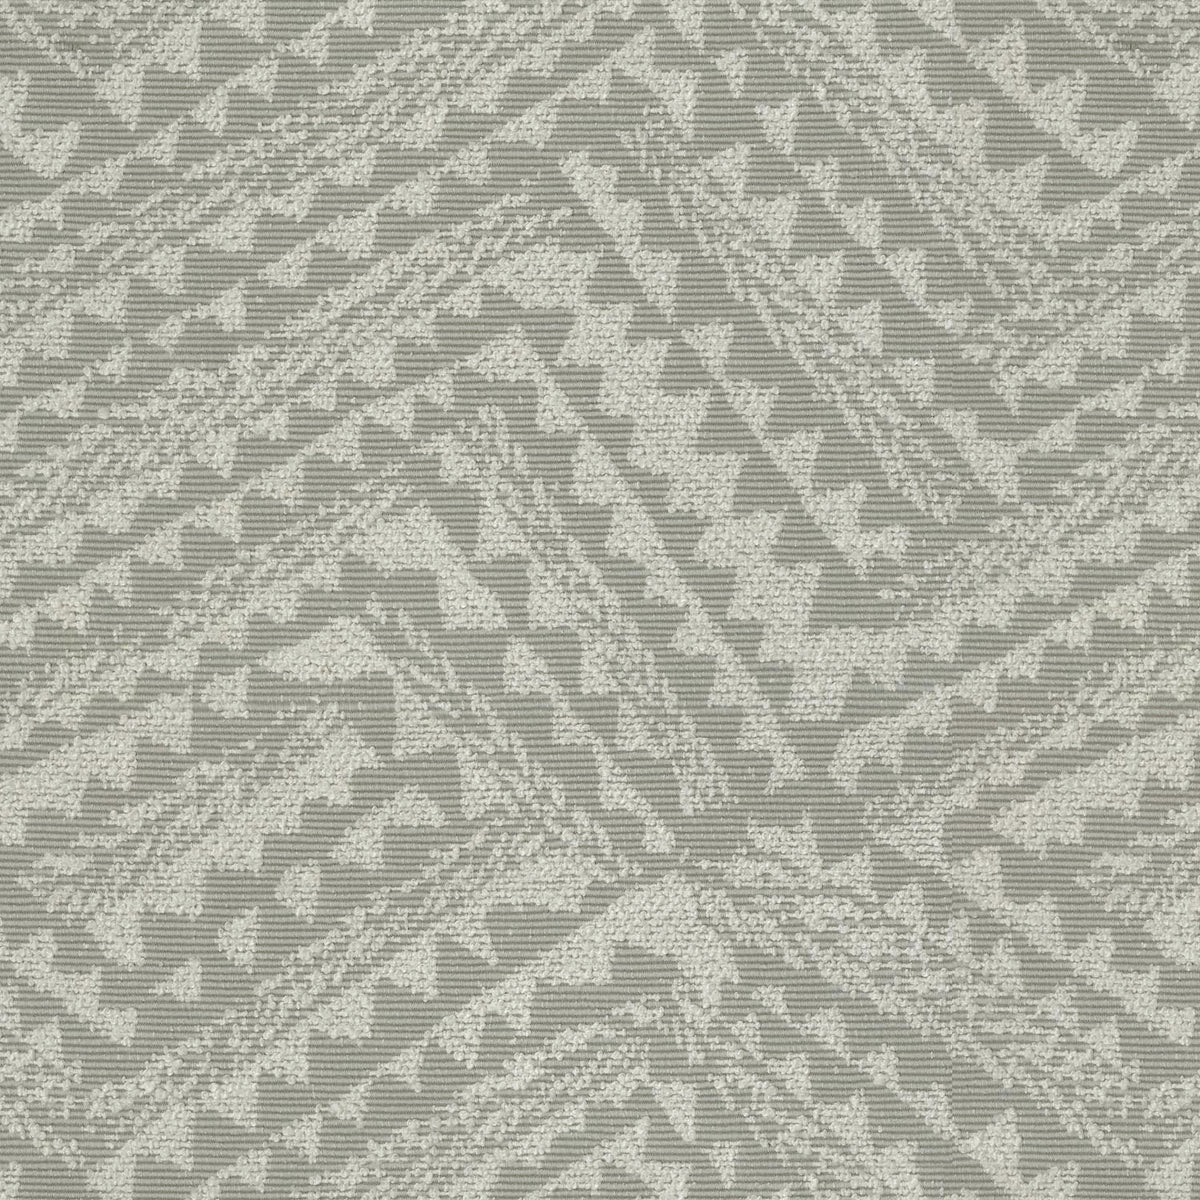 P/K Lifestyles Braided Lines - Dove 410752 Upholstery Fabric